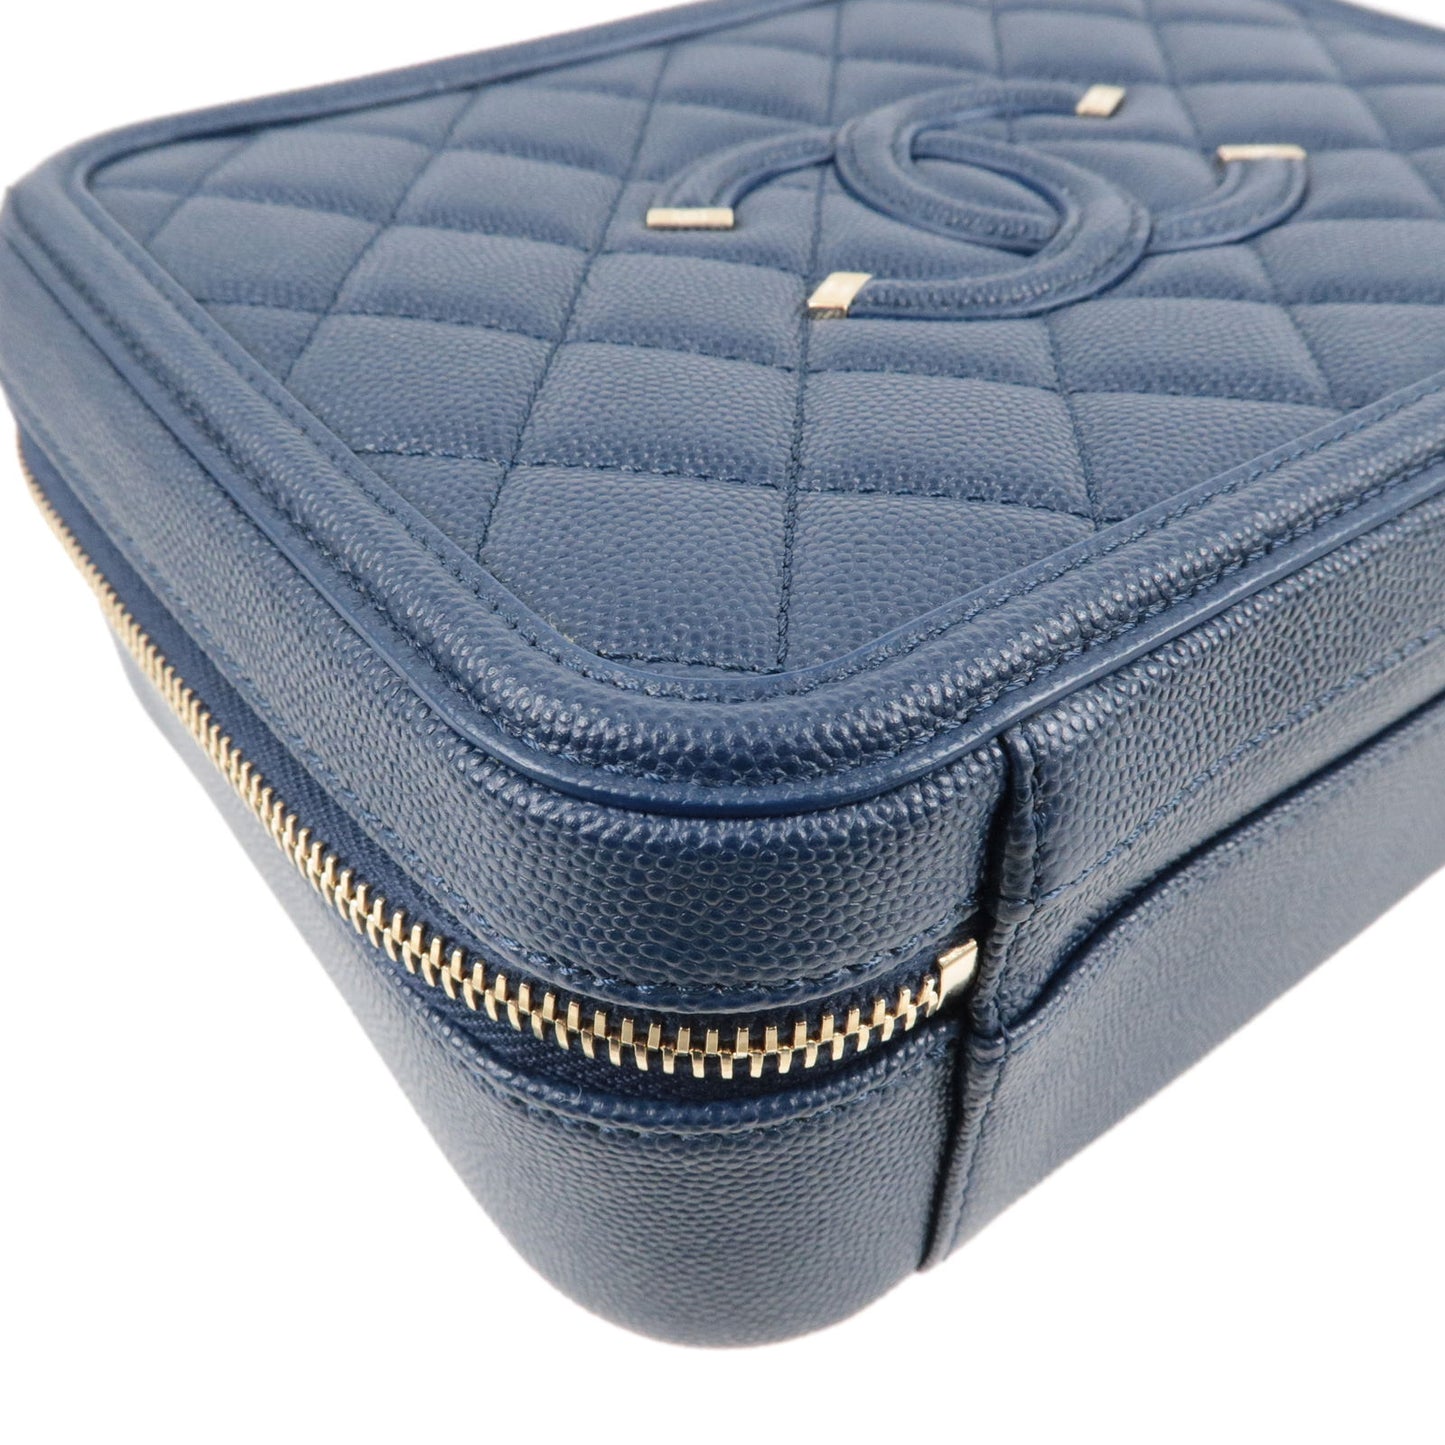 REDUCED PRICE] Chanel Filigree Vanity Case A93343, Women's Fashion